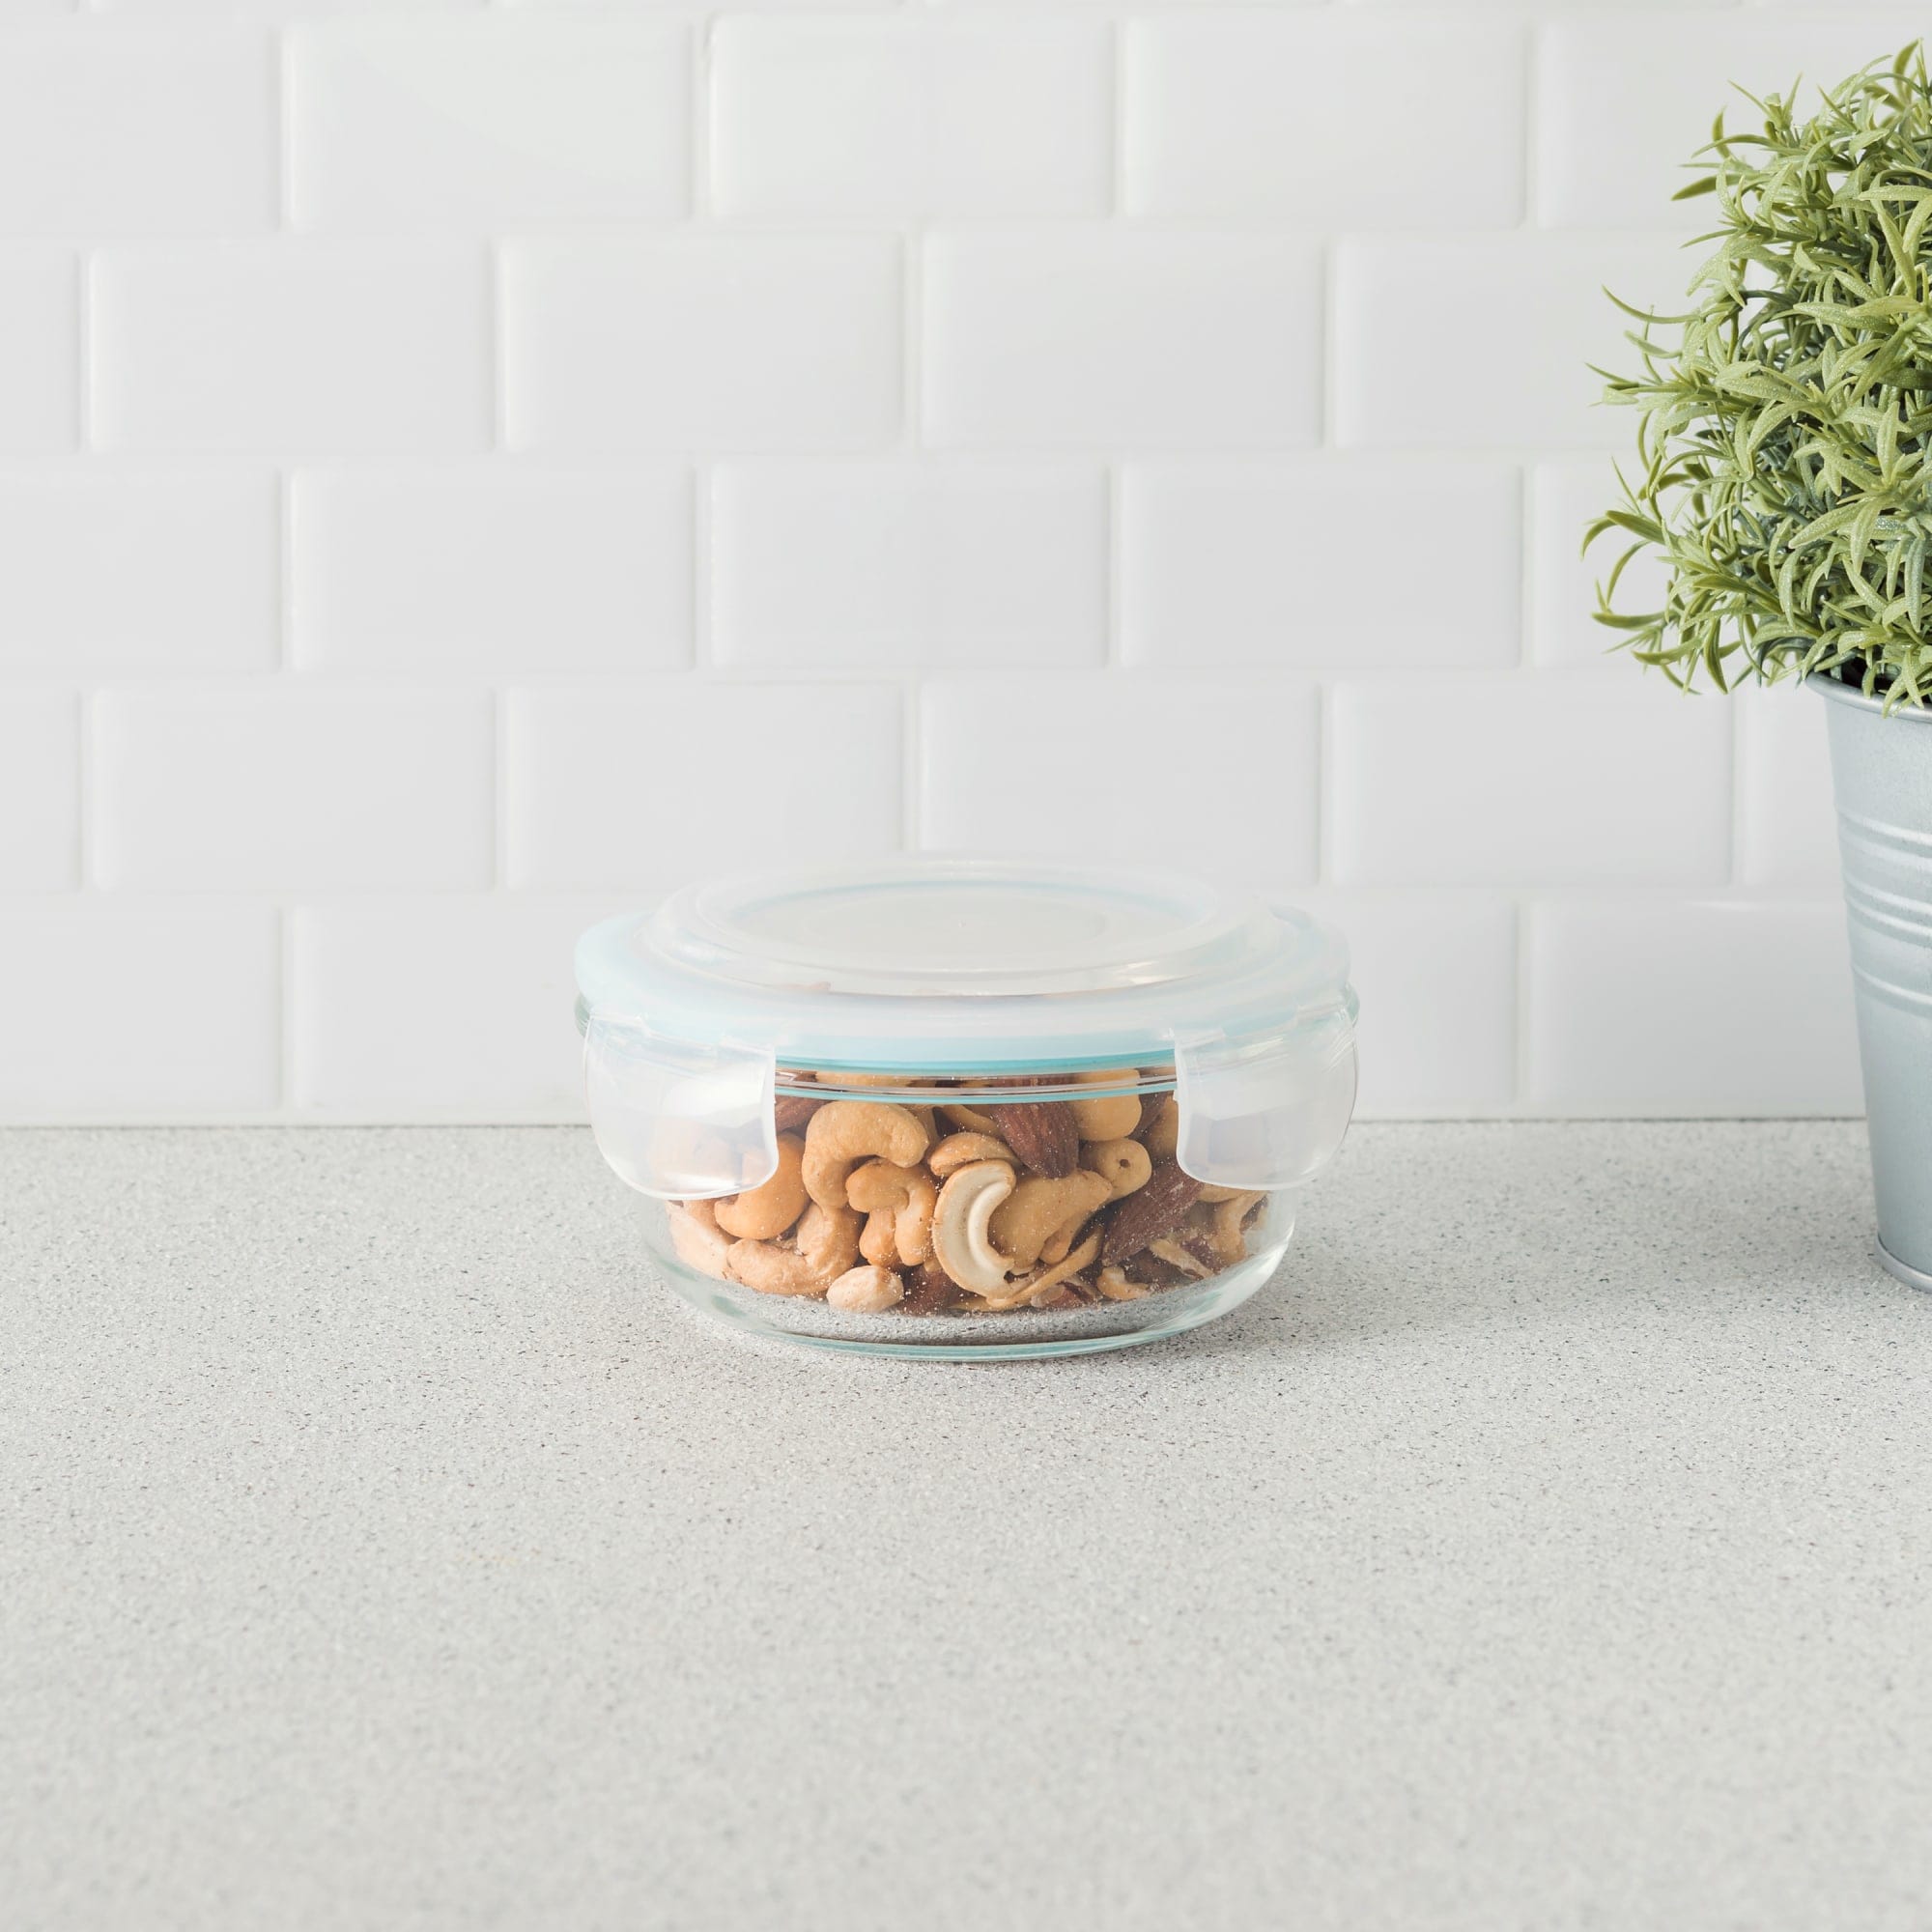 Home Basics 13 oz. Round Borosilicate Glass Food Storage Container $3 EACH, CASE PACK OF 12